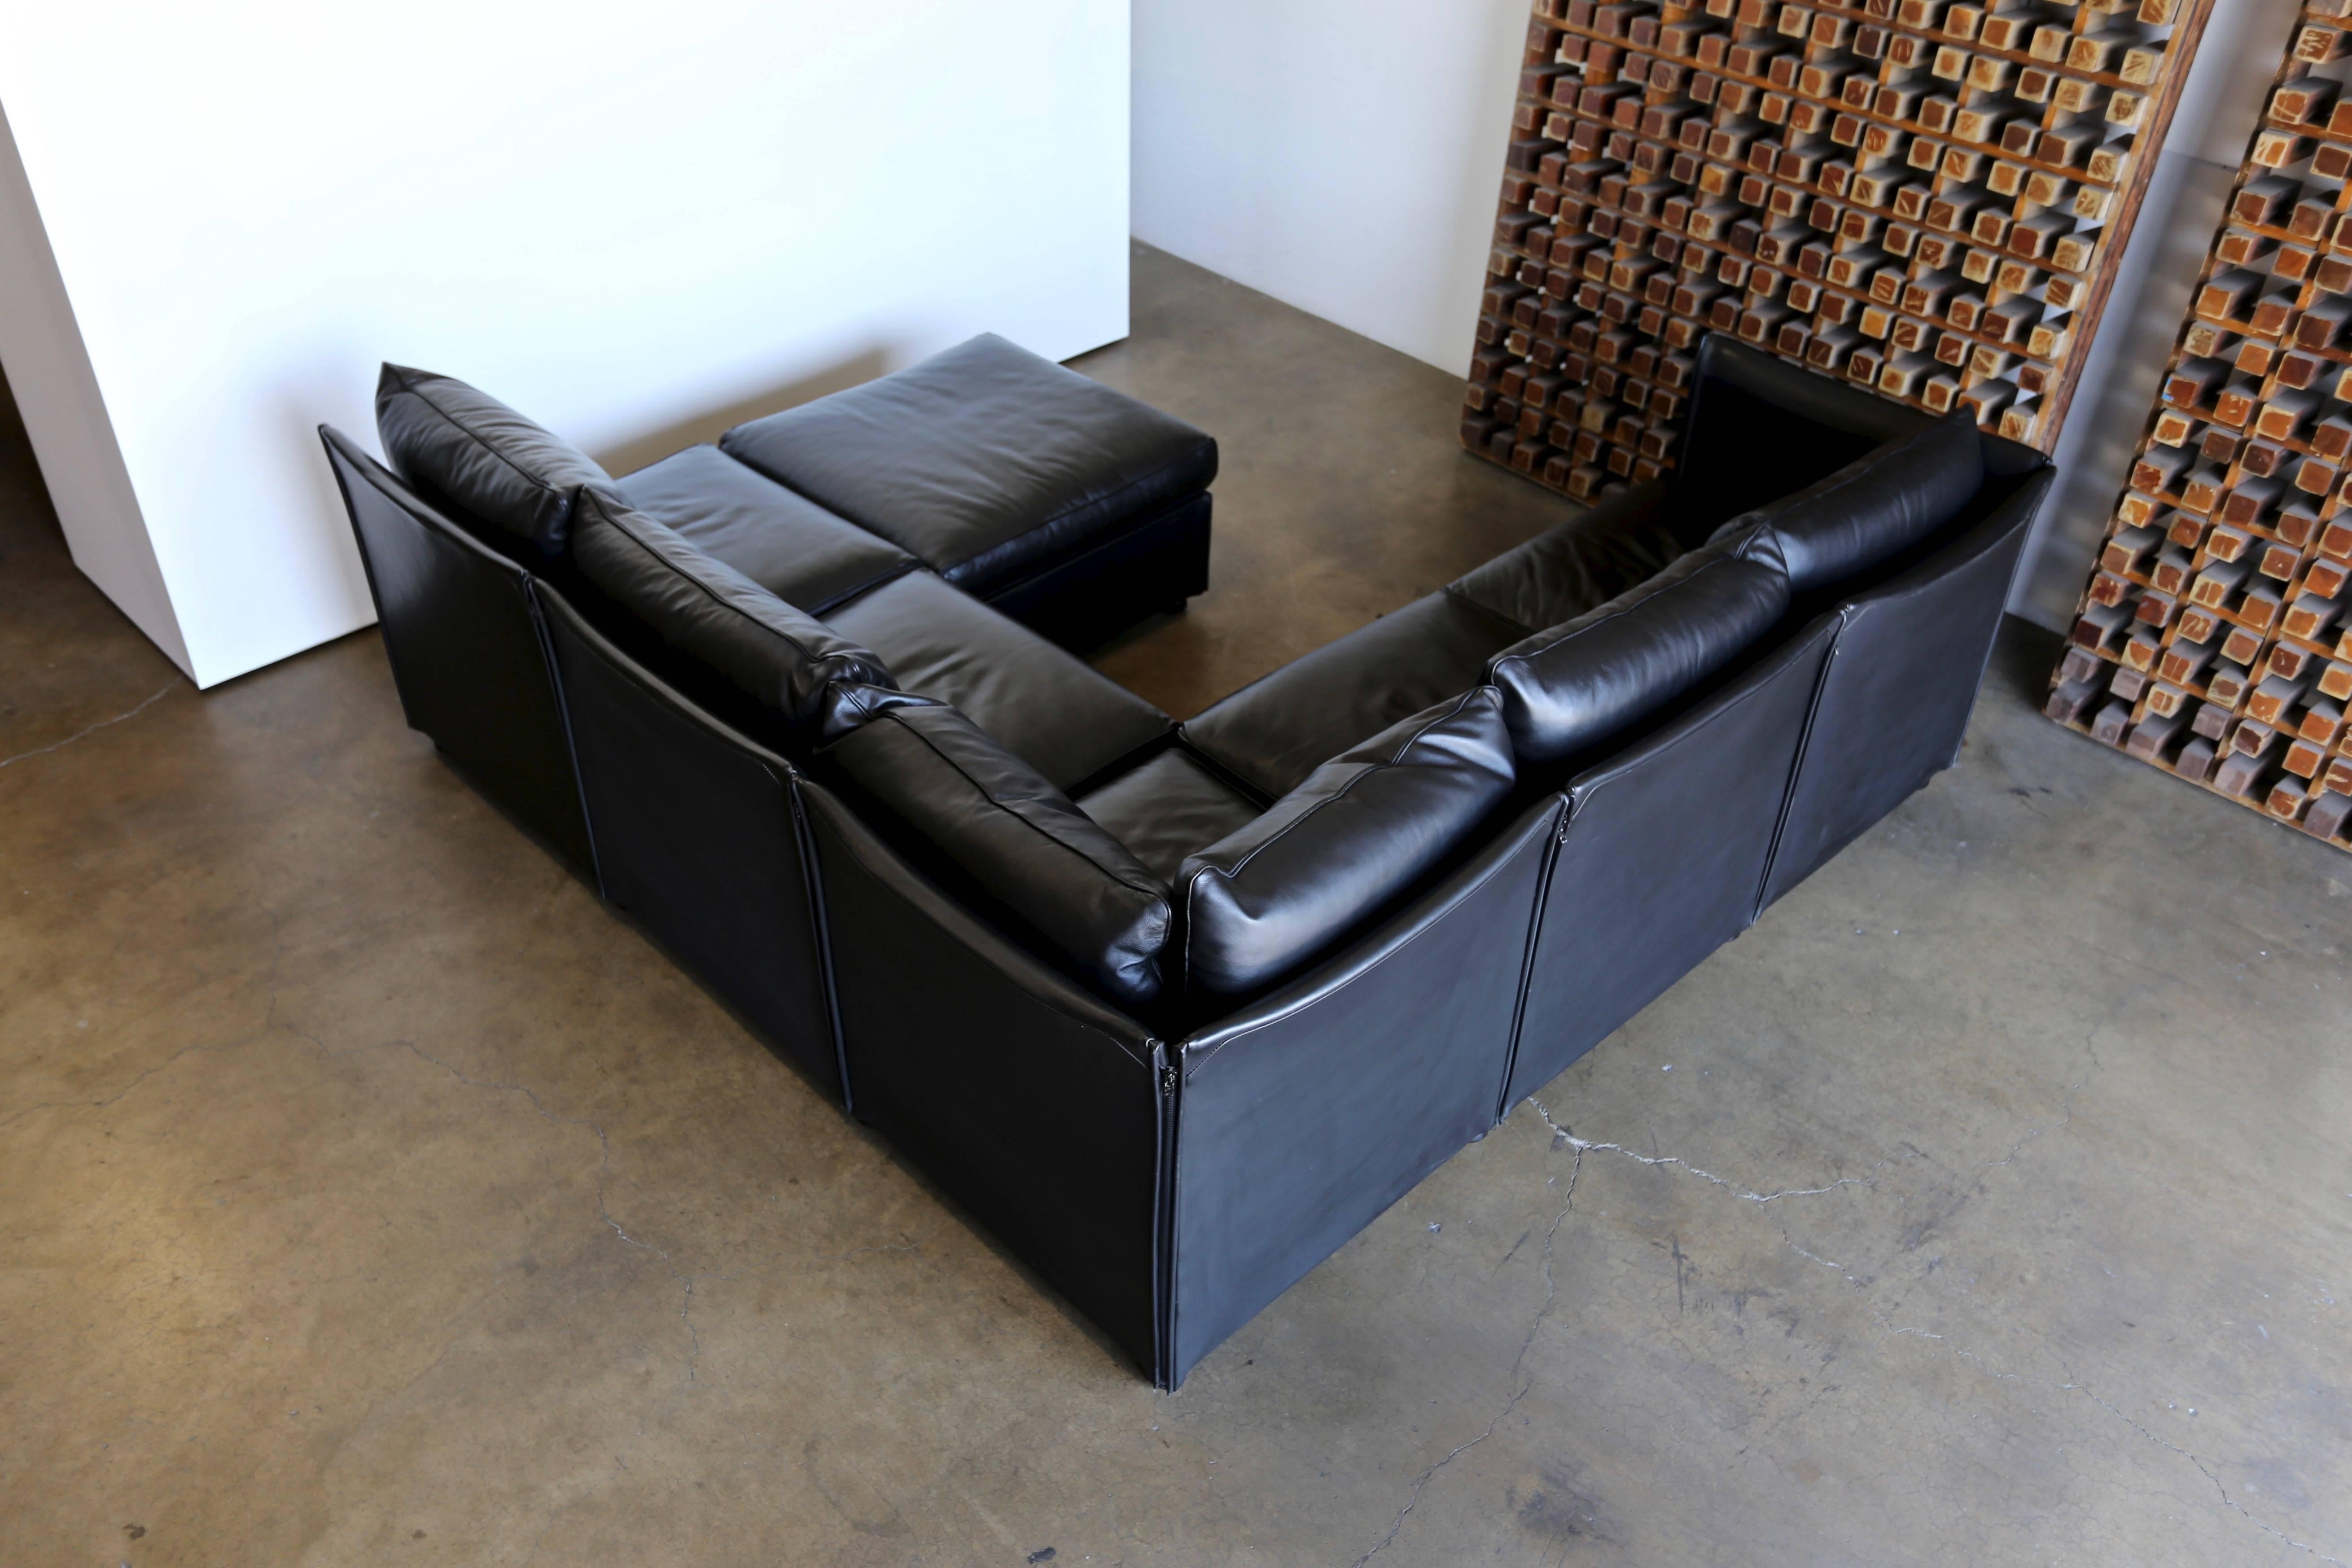 Modular leather Char-a-Banc sofa by Mario Bellin for Cassina. Seven pieces that can be configured to best meet the spaces needs. 

The listed measurements are of the sofa layout pictured in the 1st image.